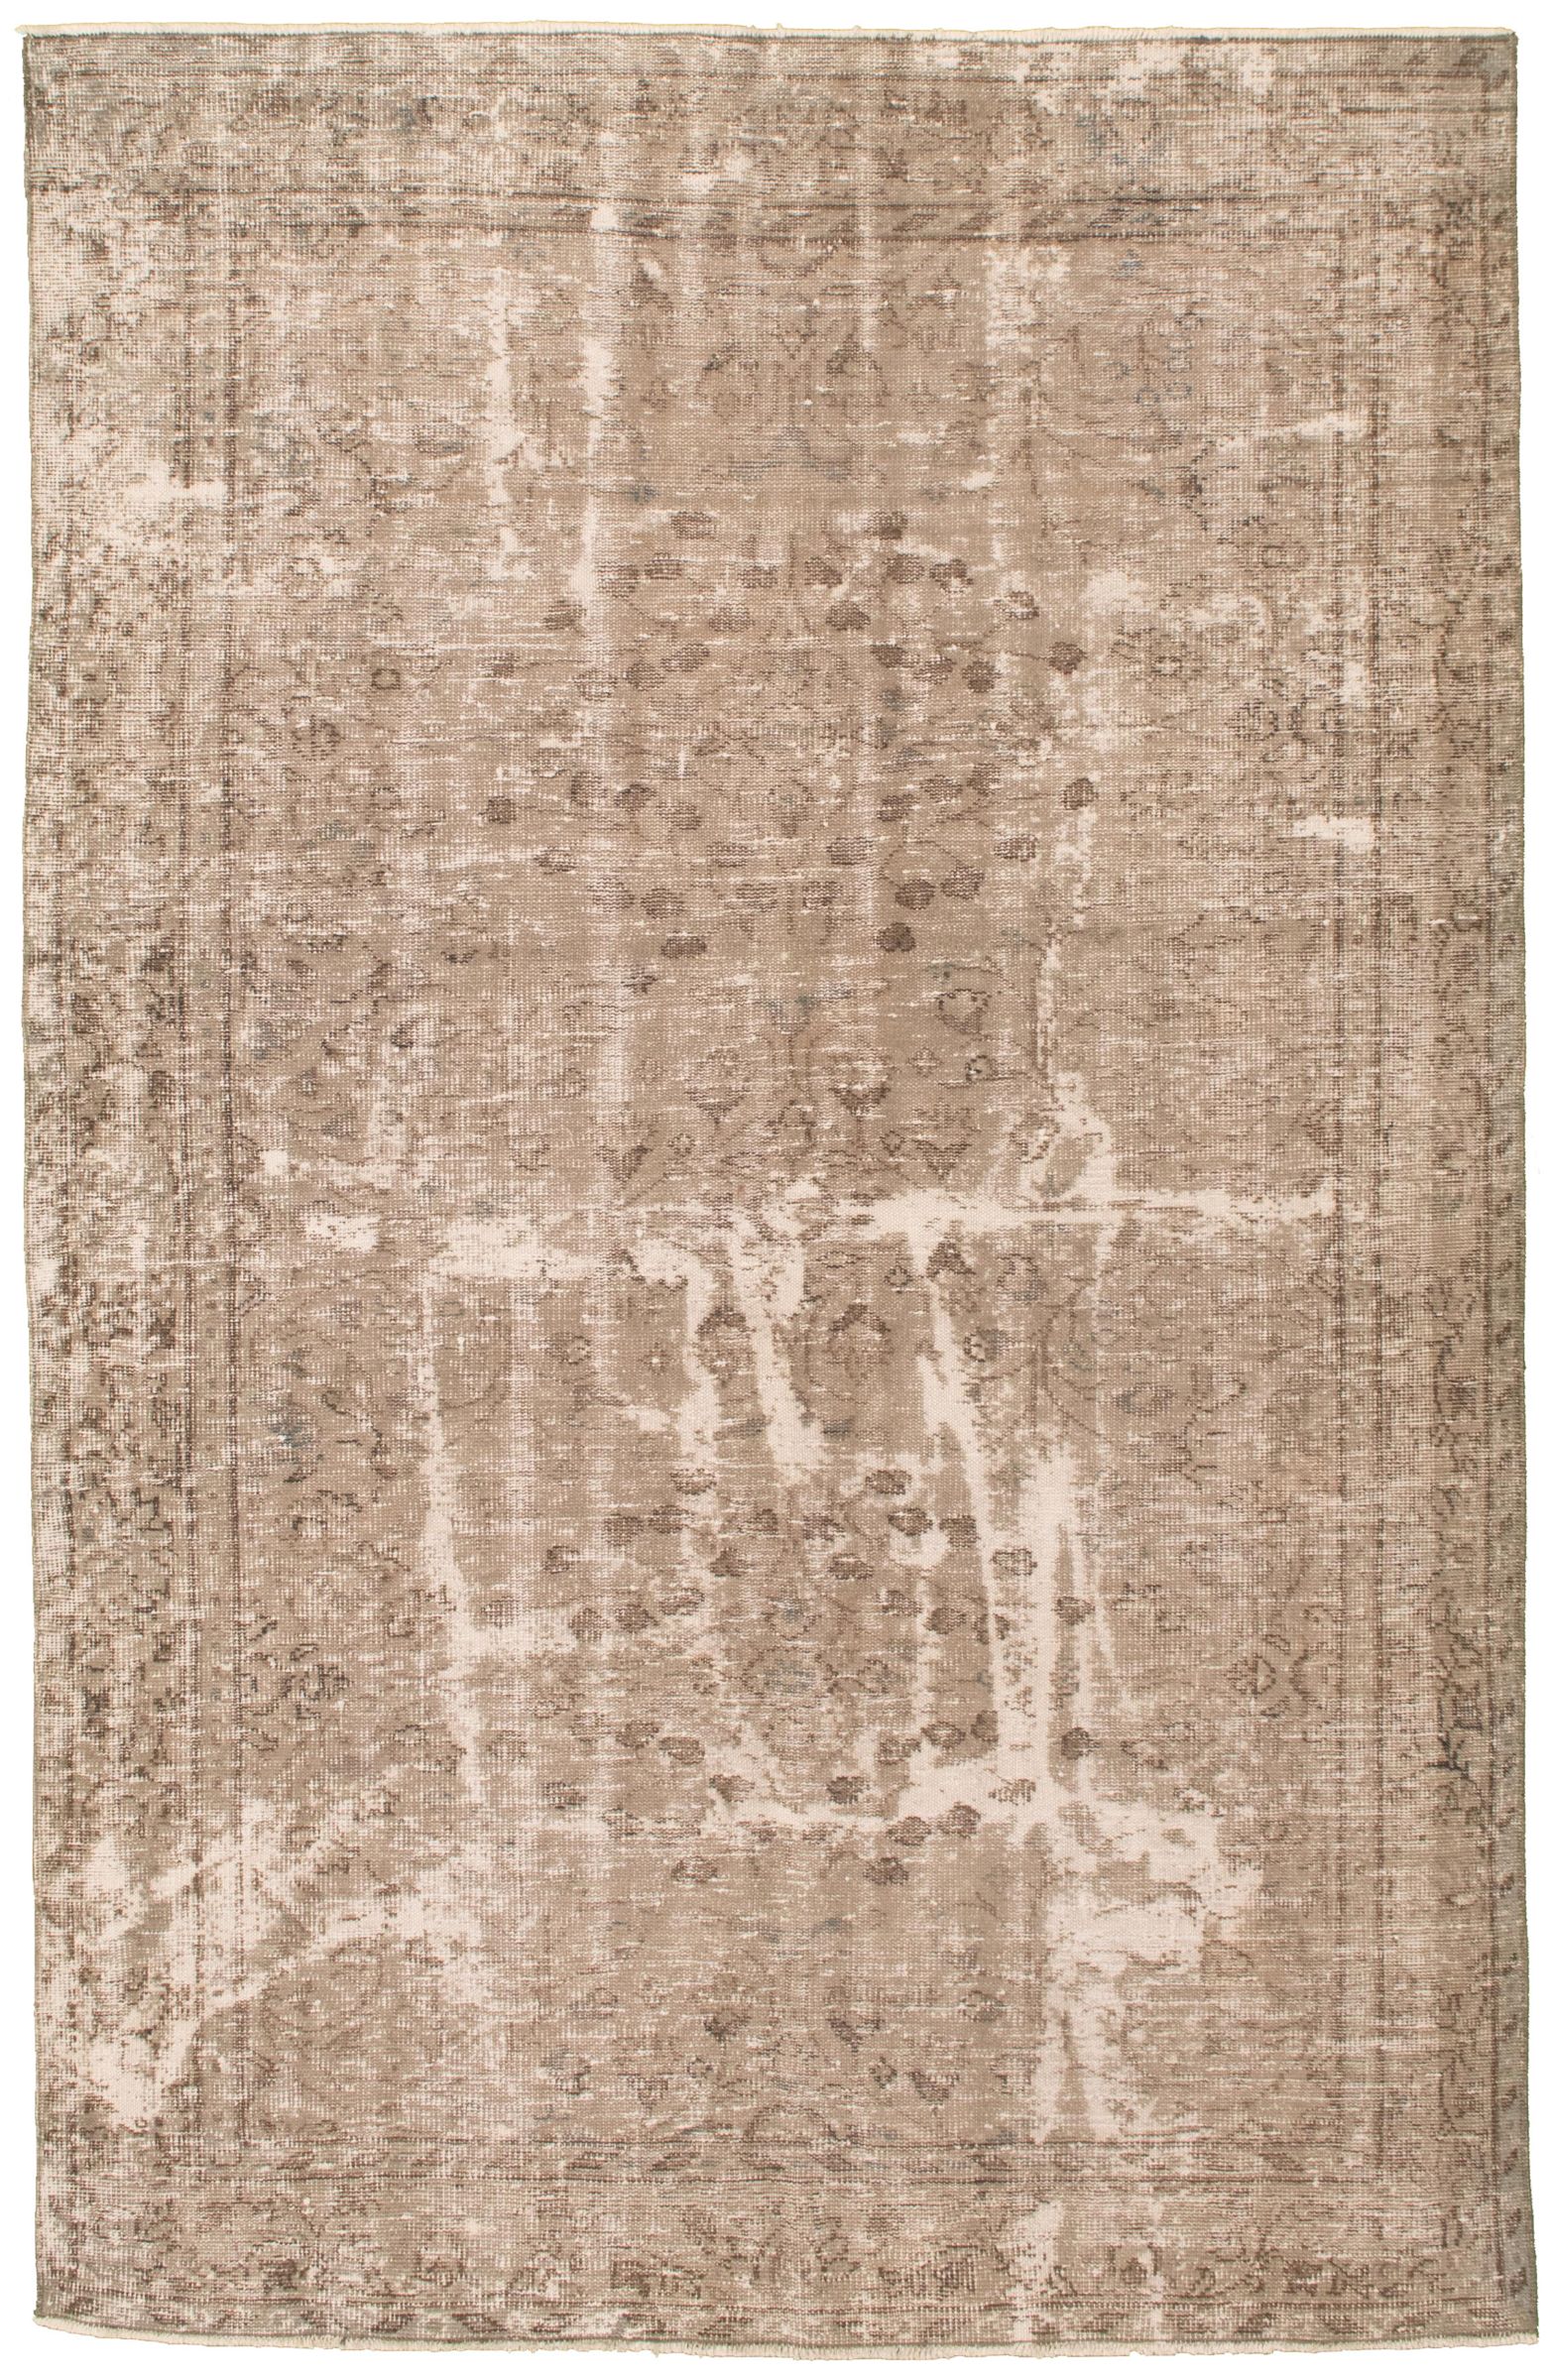 Hand-knotted Color Transition Khaki Wool Rug 5'6" x 8'9" Size: 5'6" x 8'9"  